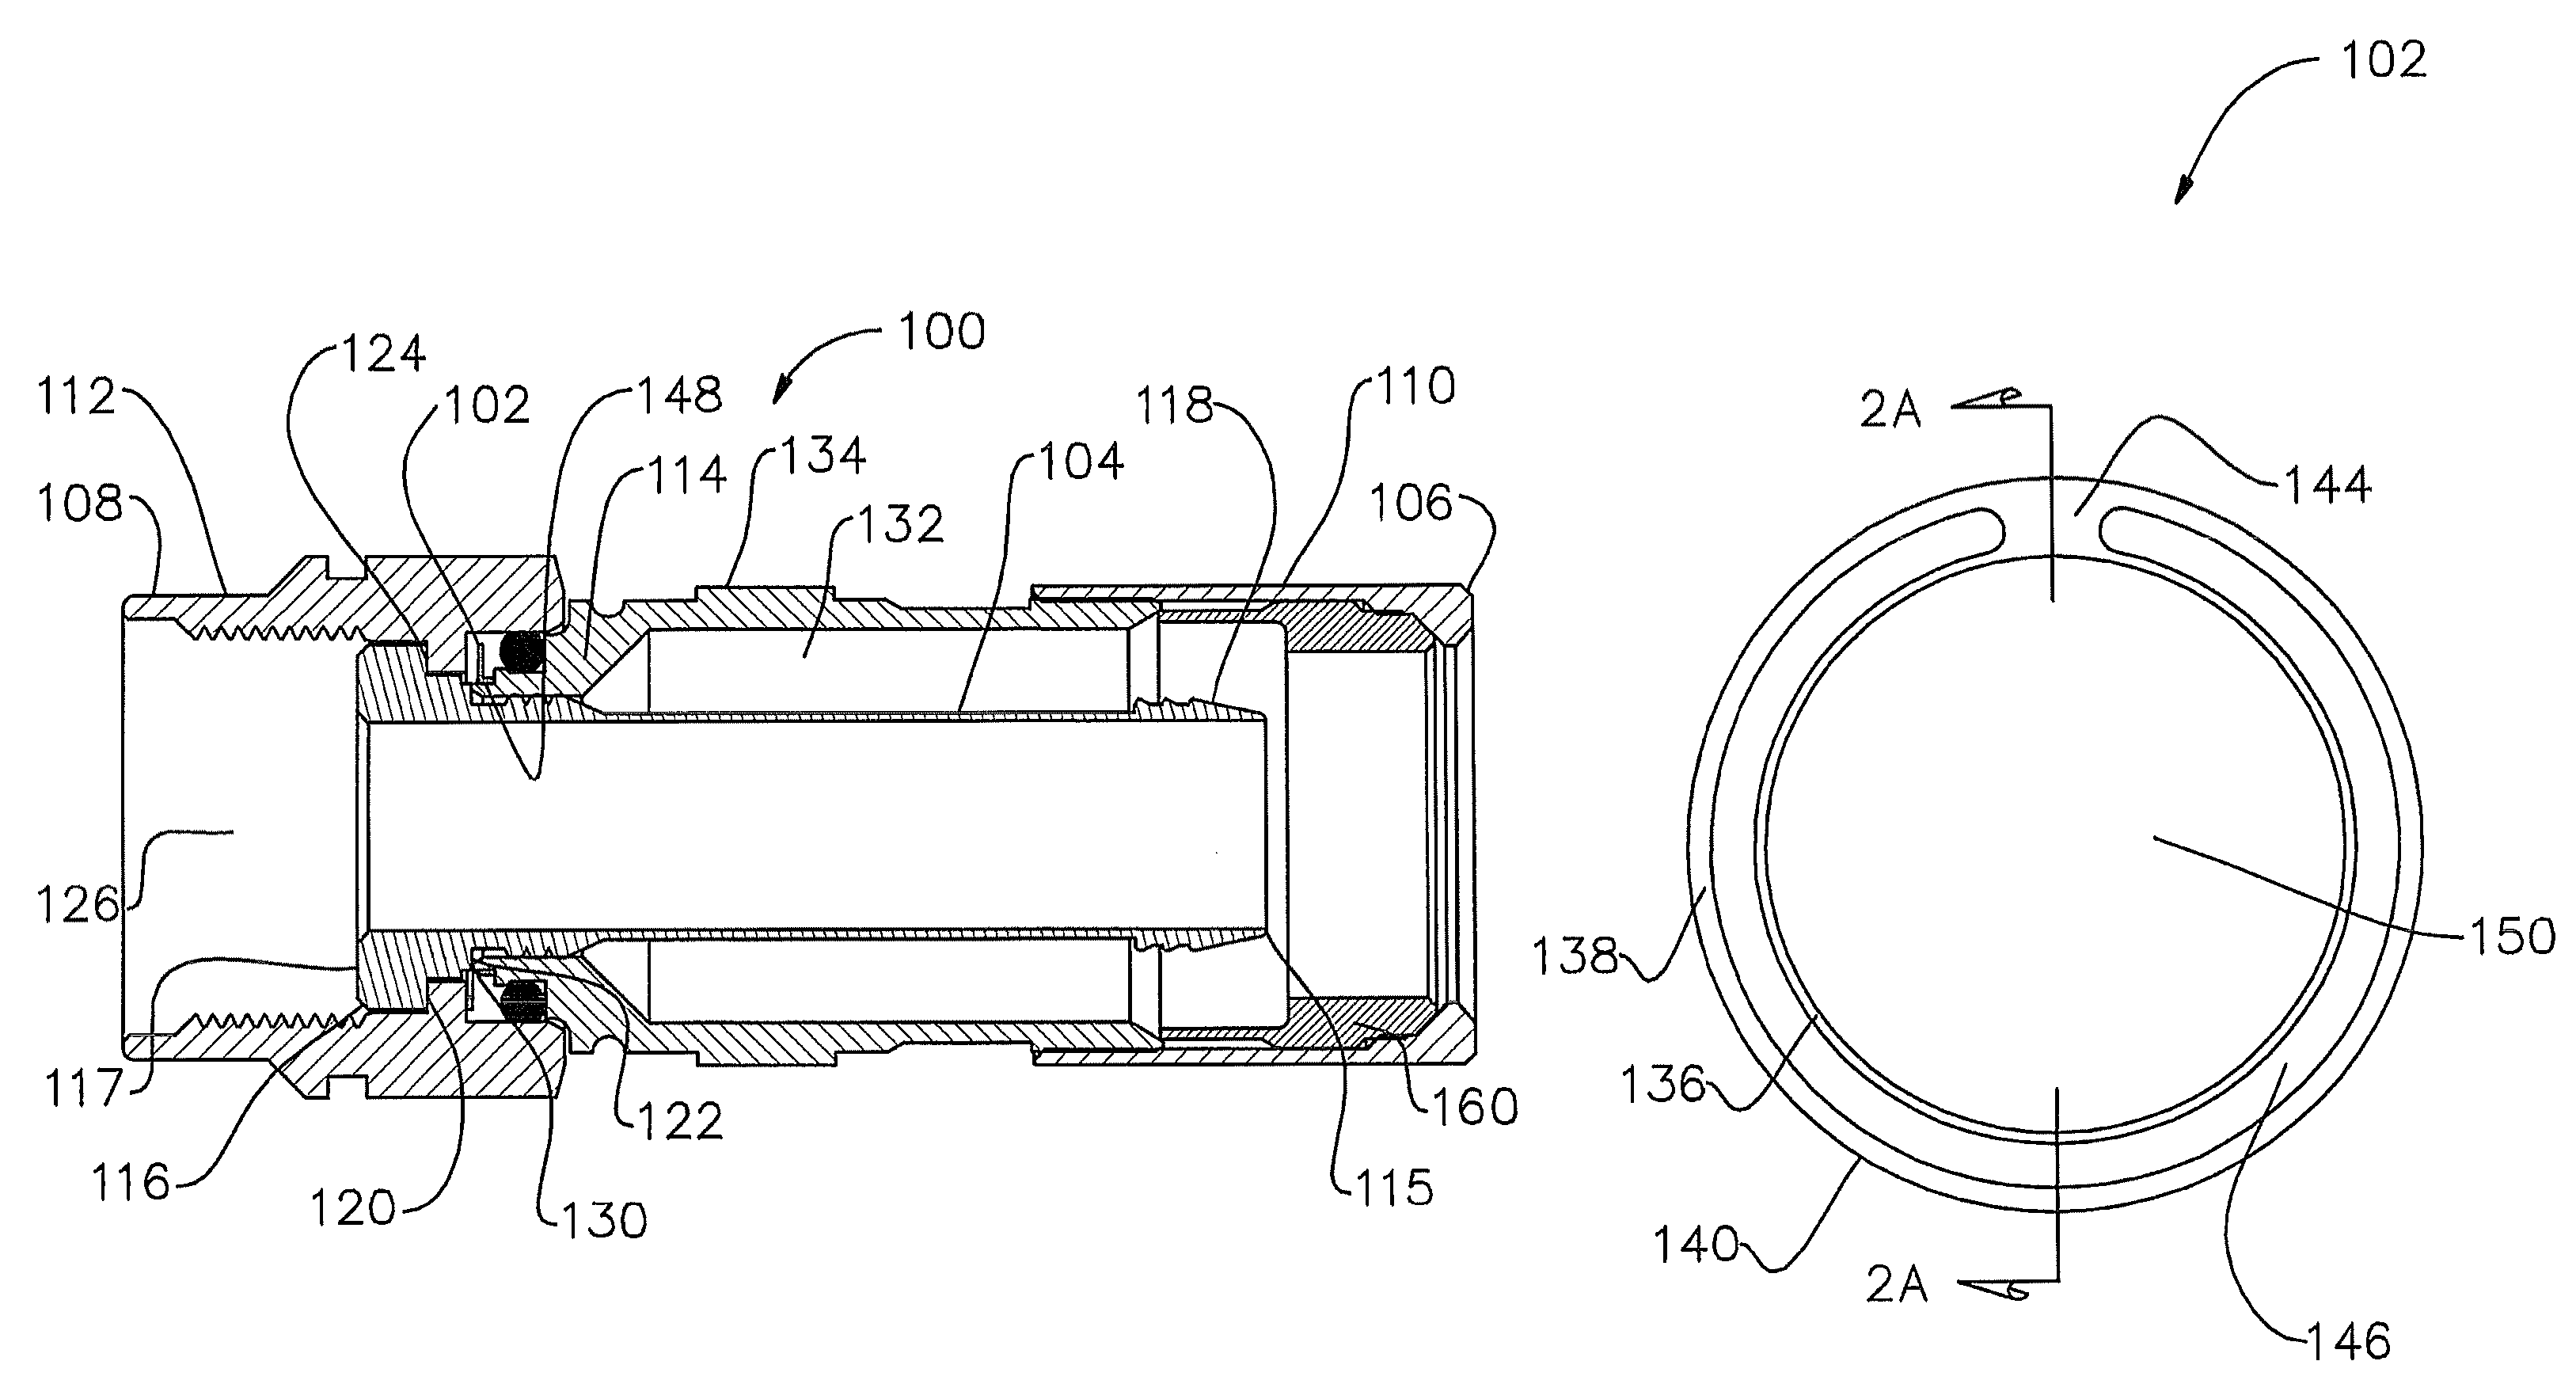 Coaxial cable connector with radio frequency interference and grounding shield